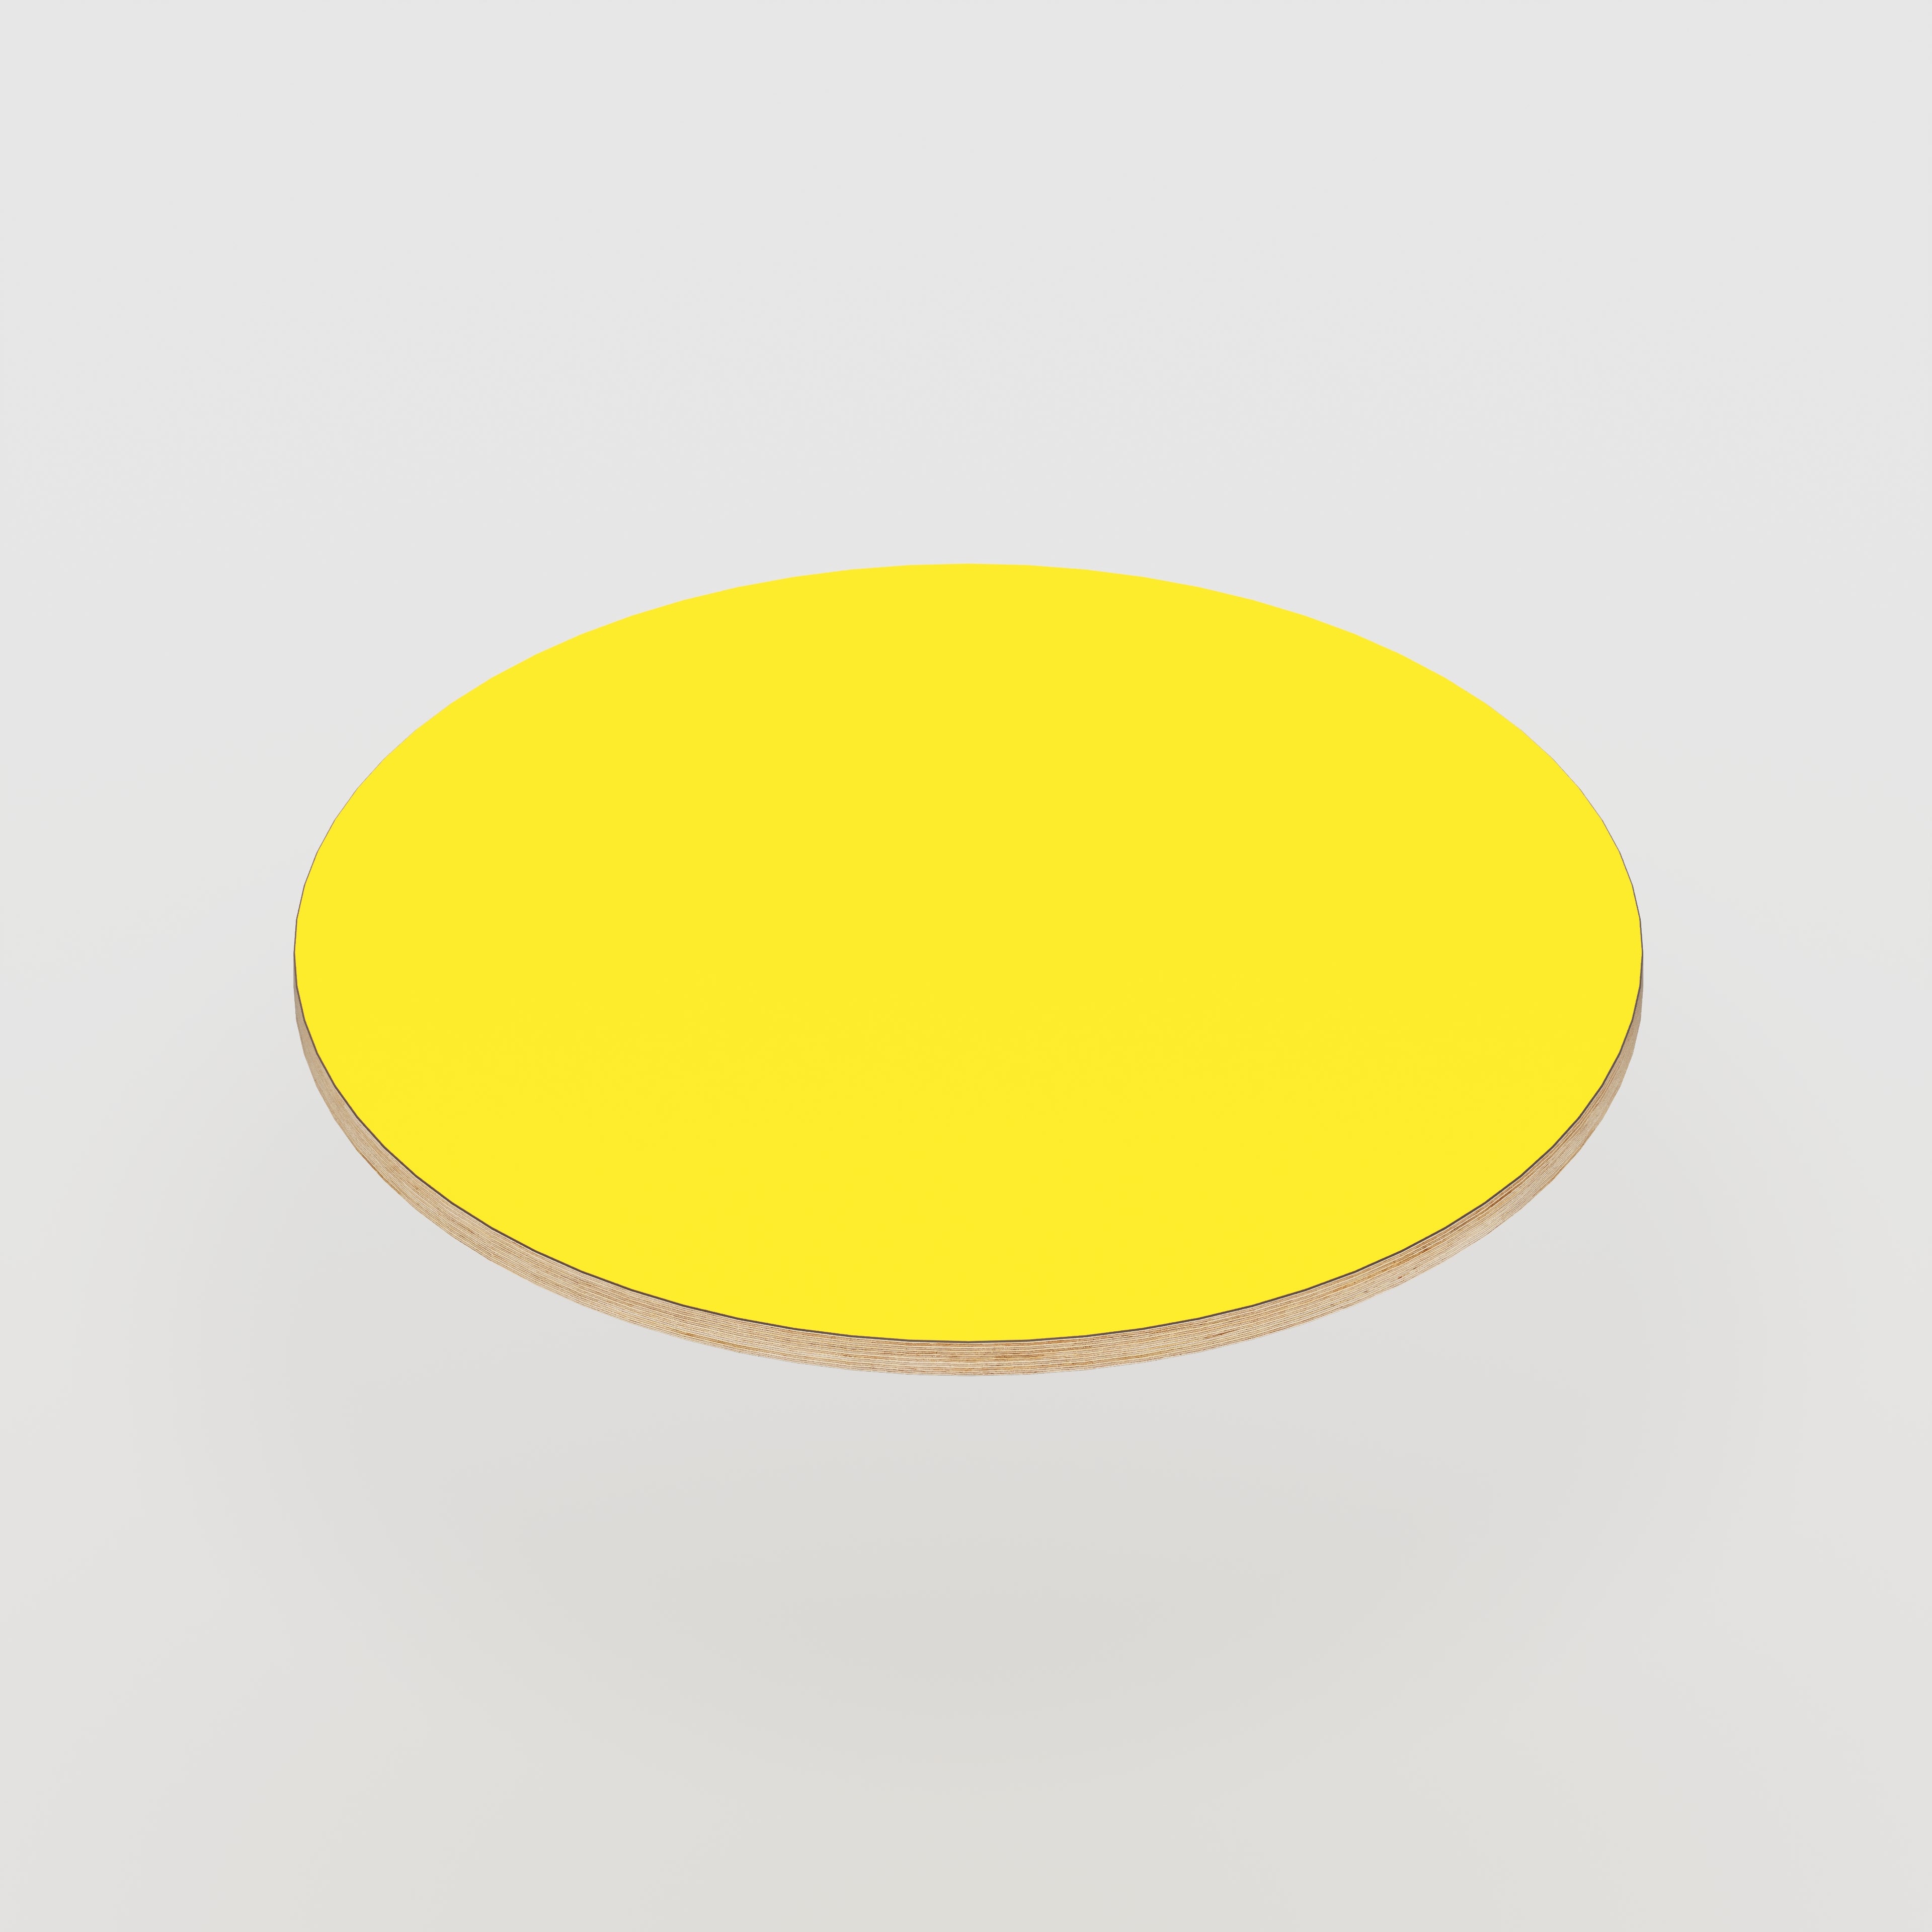 Plywood Round Tabletop - Formica Chrome Yellow - 800(dia)